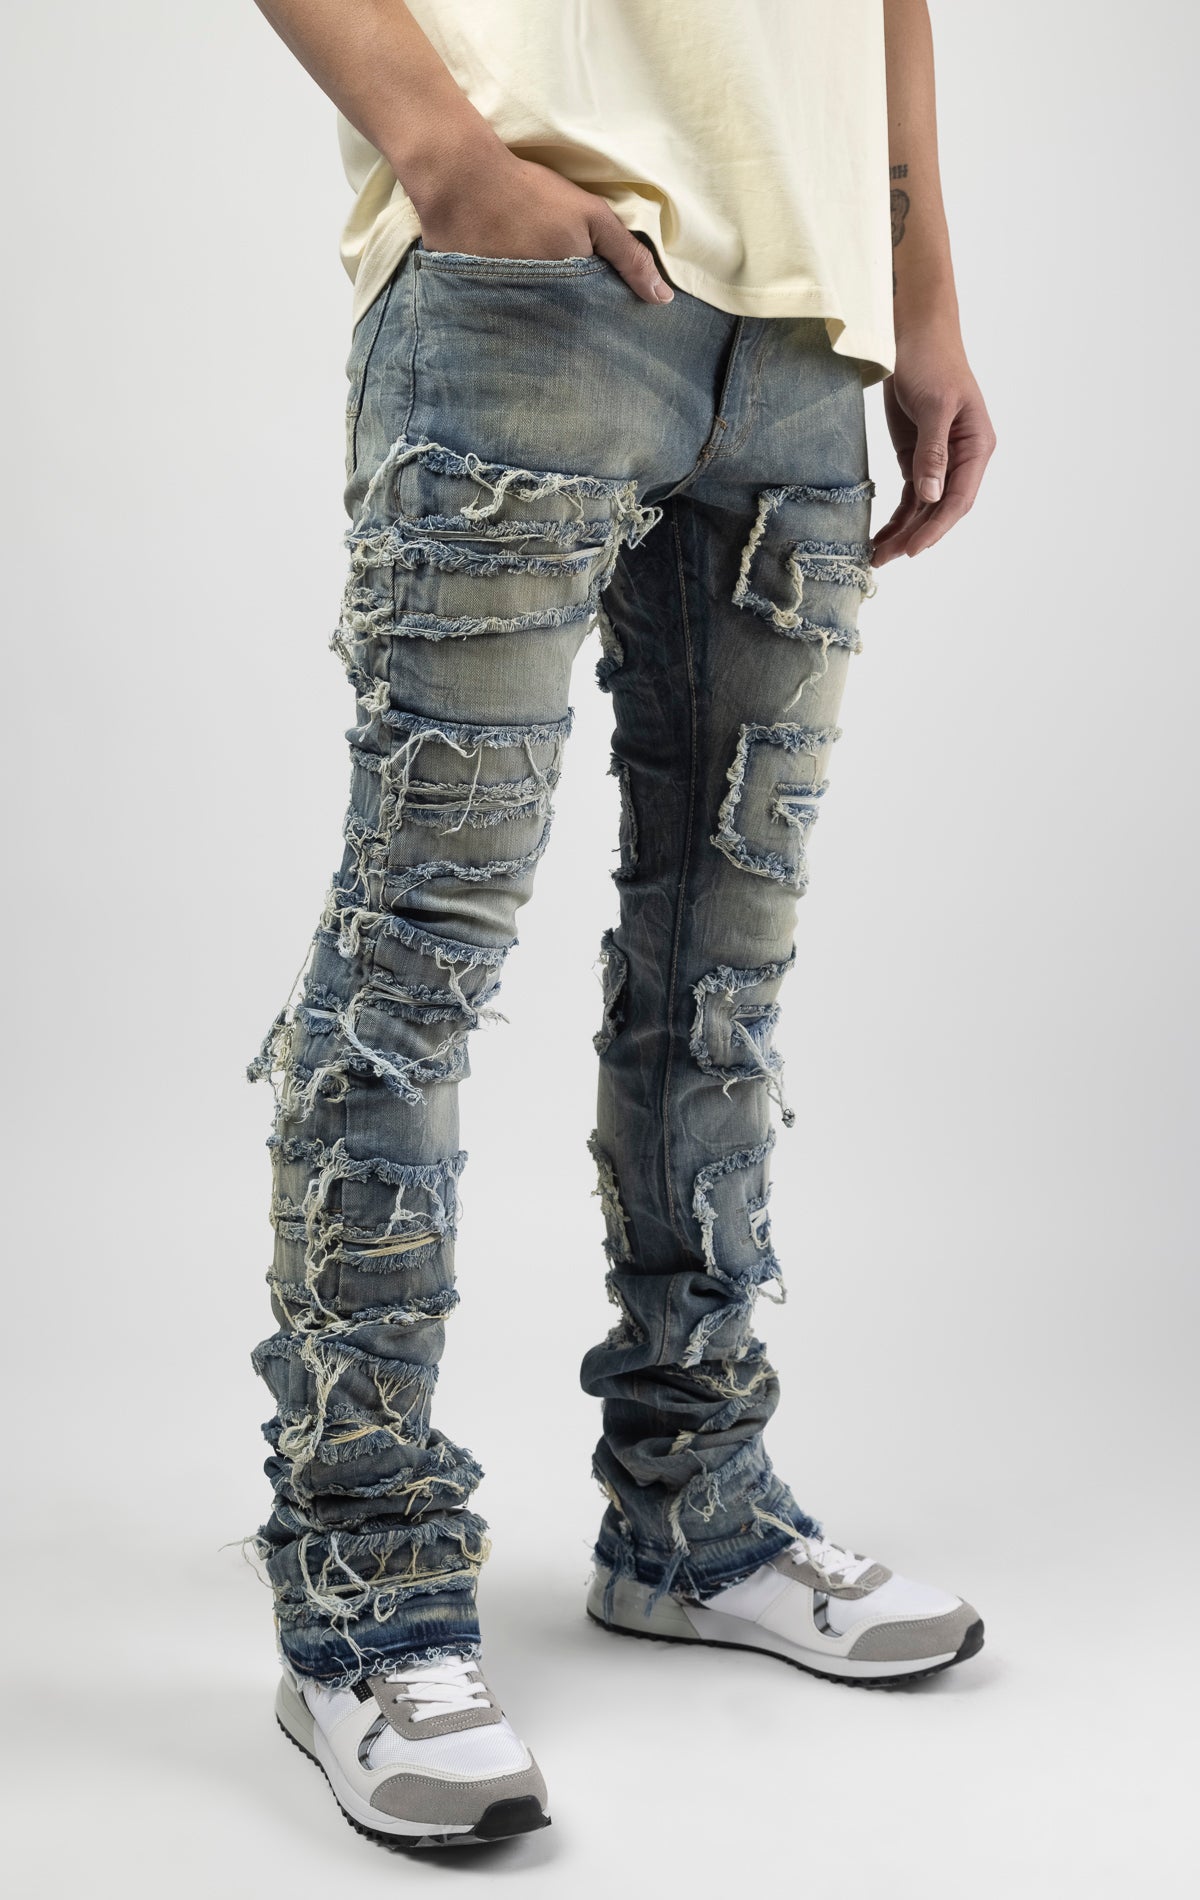 Lager bold, risk-taking flare pants feature a regular rise and extended length for maximum stacks. With a unique heavy wash and rip and repair design, complete with patches and abrasions, these skinny fit jeans are ready for adventure. Made from 98% cotton and 2% Lycra